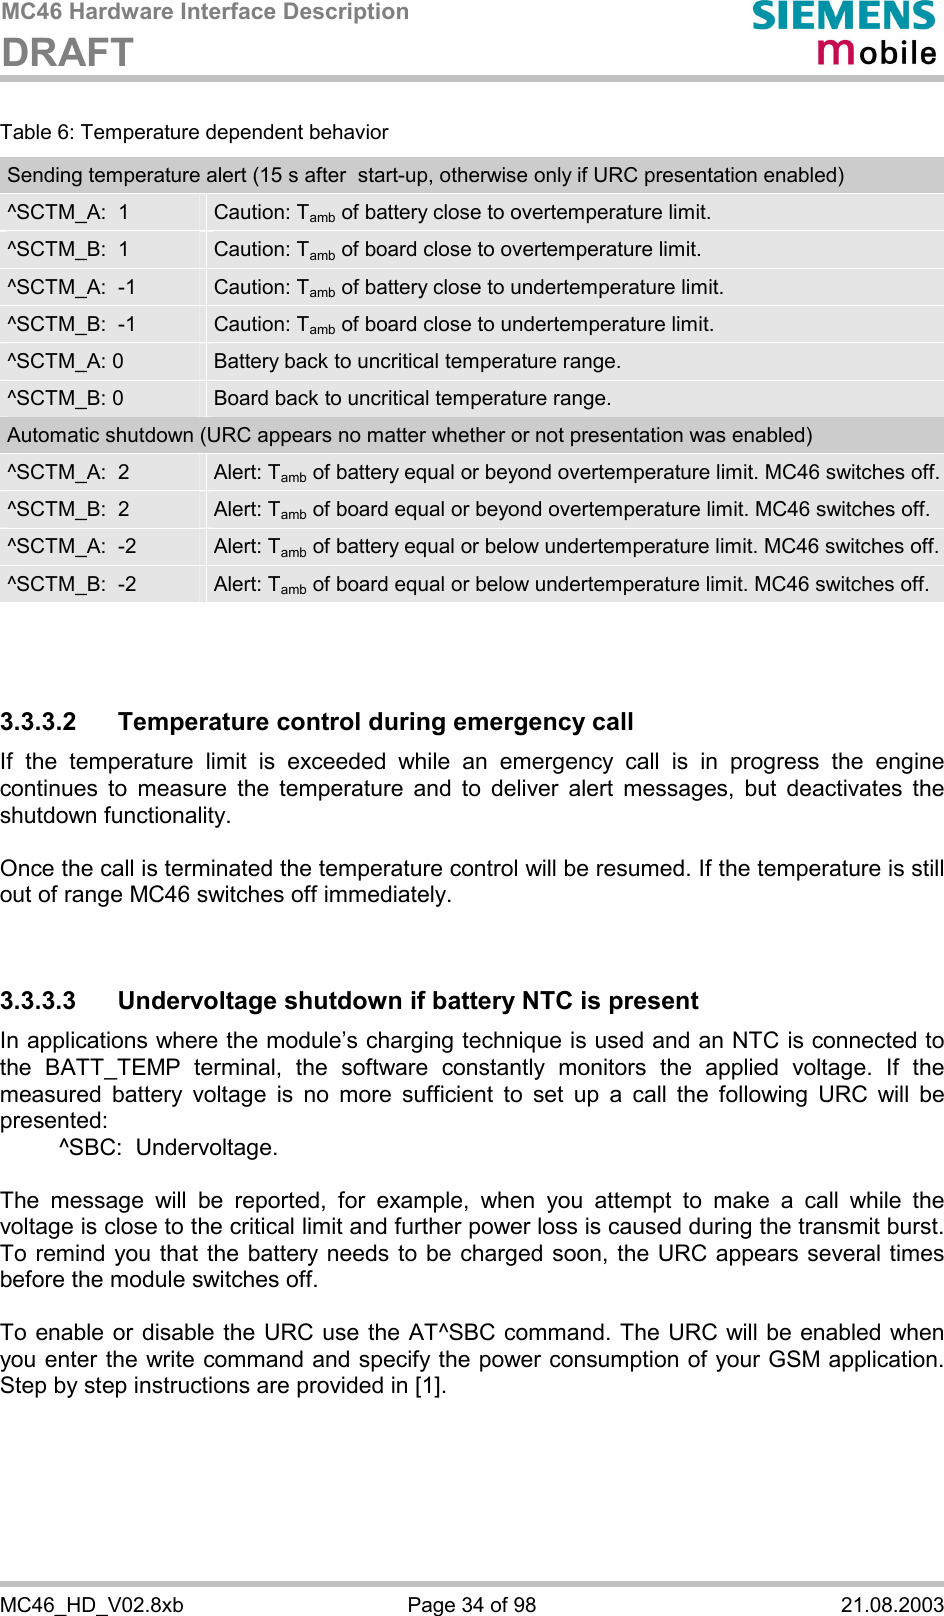 MC46 Hardware Interface Description DRAFT      MC46_HD_V02.8xb  Page 34 of 98  21.08.2003 Table 6: Temperature dependent behavior Sending temperature alert (15 s after  start-up, otherwise only if URC presentation enabled) ^SCTM_A:  1  Caution: Tamb of battery close to overtemperature limit. ^SCTM_B:  1  Caution: Tamb of board close to overtemperature limit. ^SCTM_A:  -1  Caution: Tamb of battery close to undertemperature limit. ^SCTM_B:  -1  Caution: Tamb of board close to undertemperature limit. ^SCTM_A: 0  Battery back to uncritical temperature range. ^SCTM_B: 0  Board back to uncritical temperature range. Automatic shutdown (URC appears no matter whether or not presentation was enabled) ^SCTM_A:  2  Alert: Tamb of battery equal or beyond overtemperature limit. MC46 switches off.^SCTM_B:  2  Alert: Tamb of board equal or beyond overtemperature limit. MC46 switches off. ^SCTM_A:  -2  Alert: Tamb of battery equal or below undertemperature limit. MC46 switches off. ^SCTM_B:  -2  Alert: Tamb of board equal or below undertemperature limit. MC46 switches off.    3.3.3.2  Temperature control during emergency call If the temperature limit is exceeded while an emergency call is in progress the engine continues to measure the temperature and to deliver alert messages, but deactivates the shutdown functionality.   Once the call is terminated the temperature control will be resumed. If the temperature is still out of range MC46 switches off immediately.   3.3.3.3 Undervoltage shutdown if battery NTC is present In applications where the module’s charging technique is used and an NTC is connected to the BATT_TEMP terminal, the software constantly monitors the applied voltage. If the measured battery voltage is no more sufficient to set up a call the following URC will be presented:    ^SBC:  Undervoltage.  The message will be reported, for example, when you attempt to make a call while the voltage is close to the critical limit and further power loss is caused during the transmit burst. To remind you that the battery needs to be charged soon, the URC appears several times before the module switches off.   To enable or disable the URC use the AT^SBC command. The URC will be enabled when you enter the write command and specify the power consumption of your GSM application. Step by step instructions are provided in [1].   